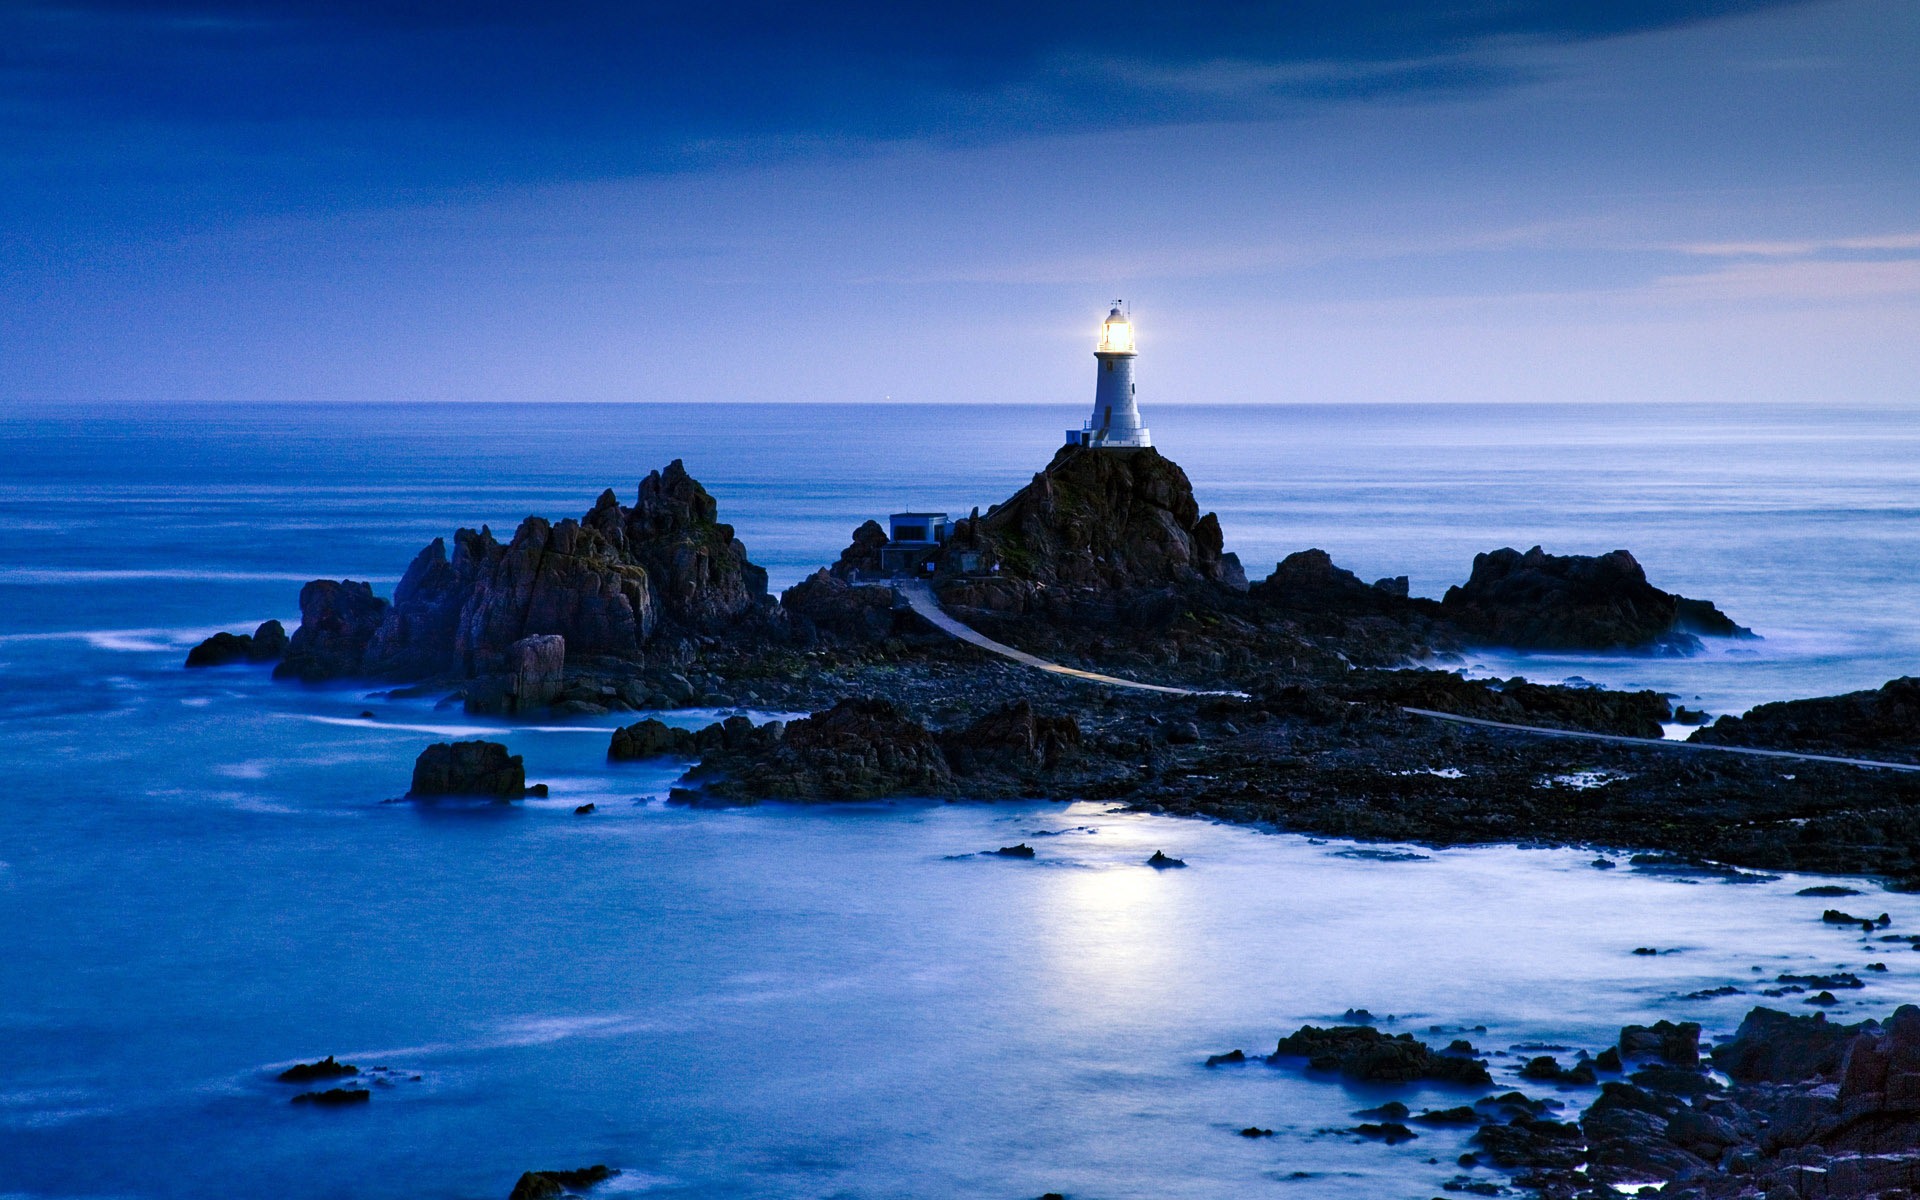 Windows 7 Wallpapers: Lighthouses #11 - 1920x1200